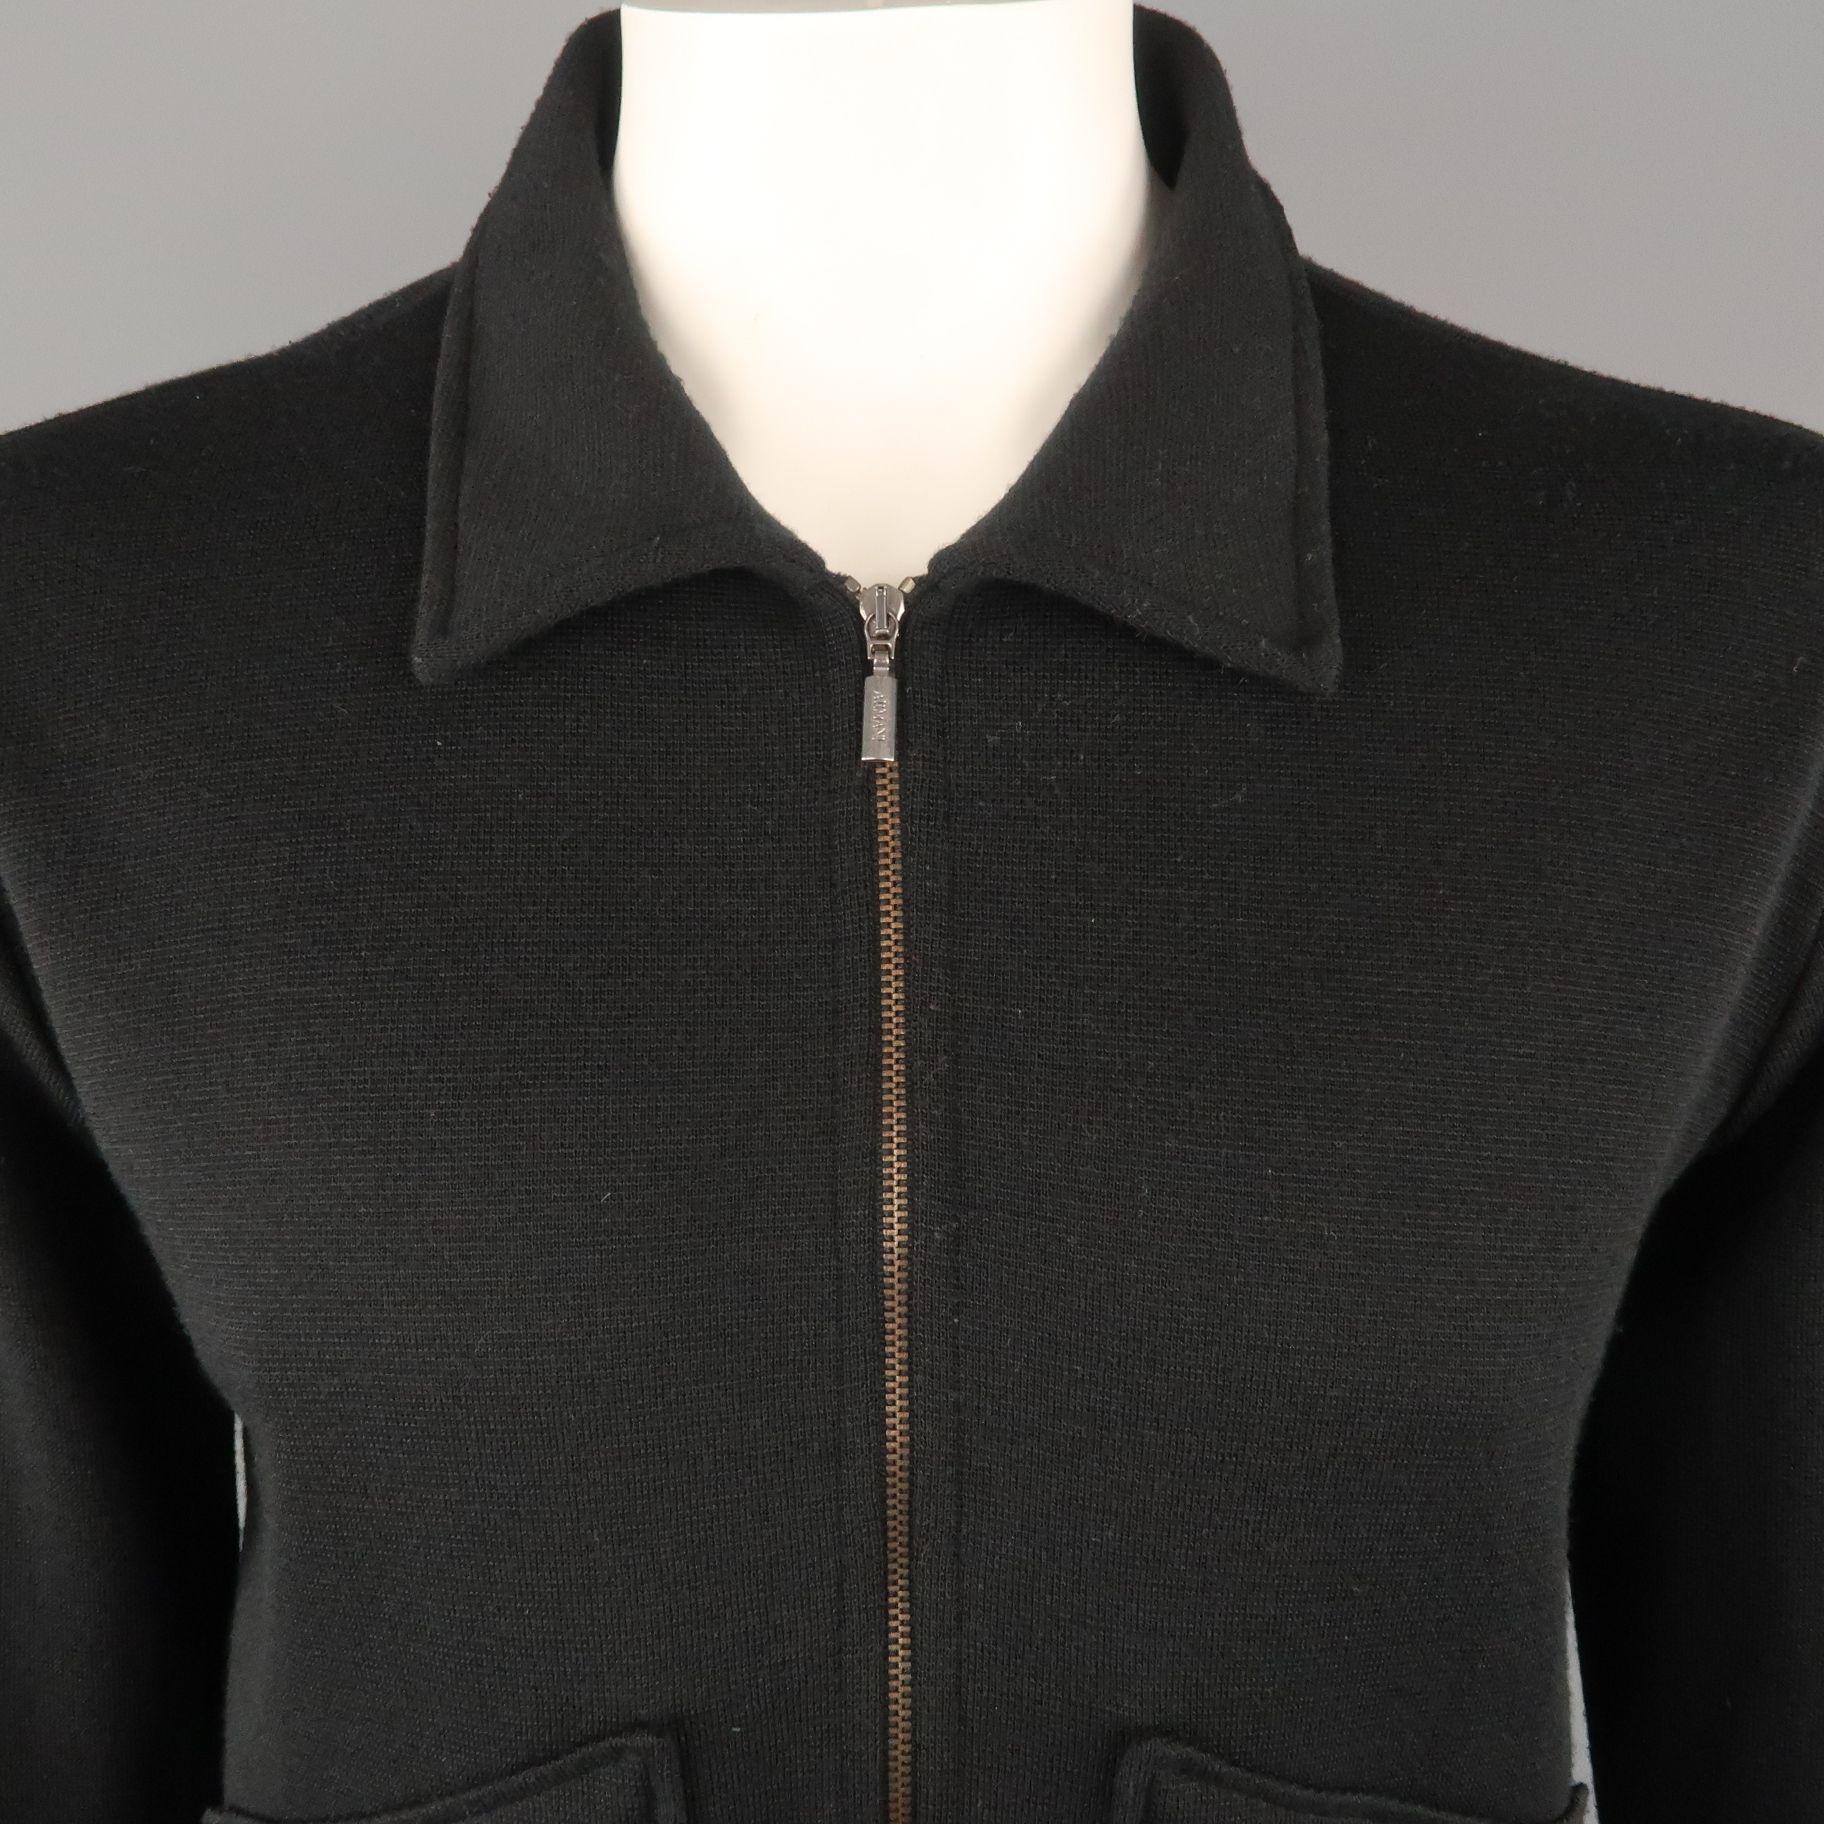 ARMANI COLLEZIONI jacket comes in a black wool blend featuring a spread collar, front zipper patch pockets, stripe trim, and a full zip closure. Made in Italy.

Excellent Pre-Owned Condition.
Marked: L

Measurements:

Shoulder: 21 in.
Chest: 44